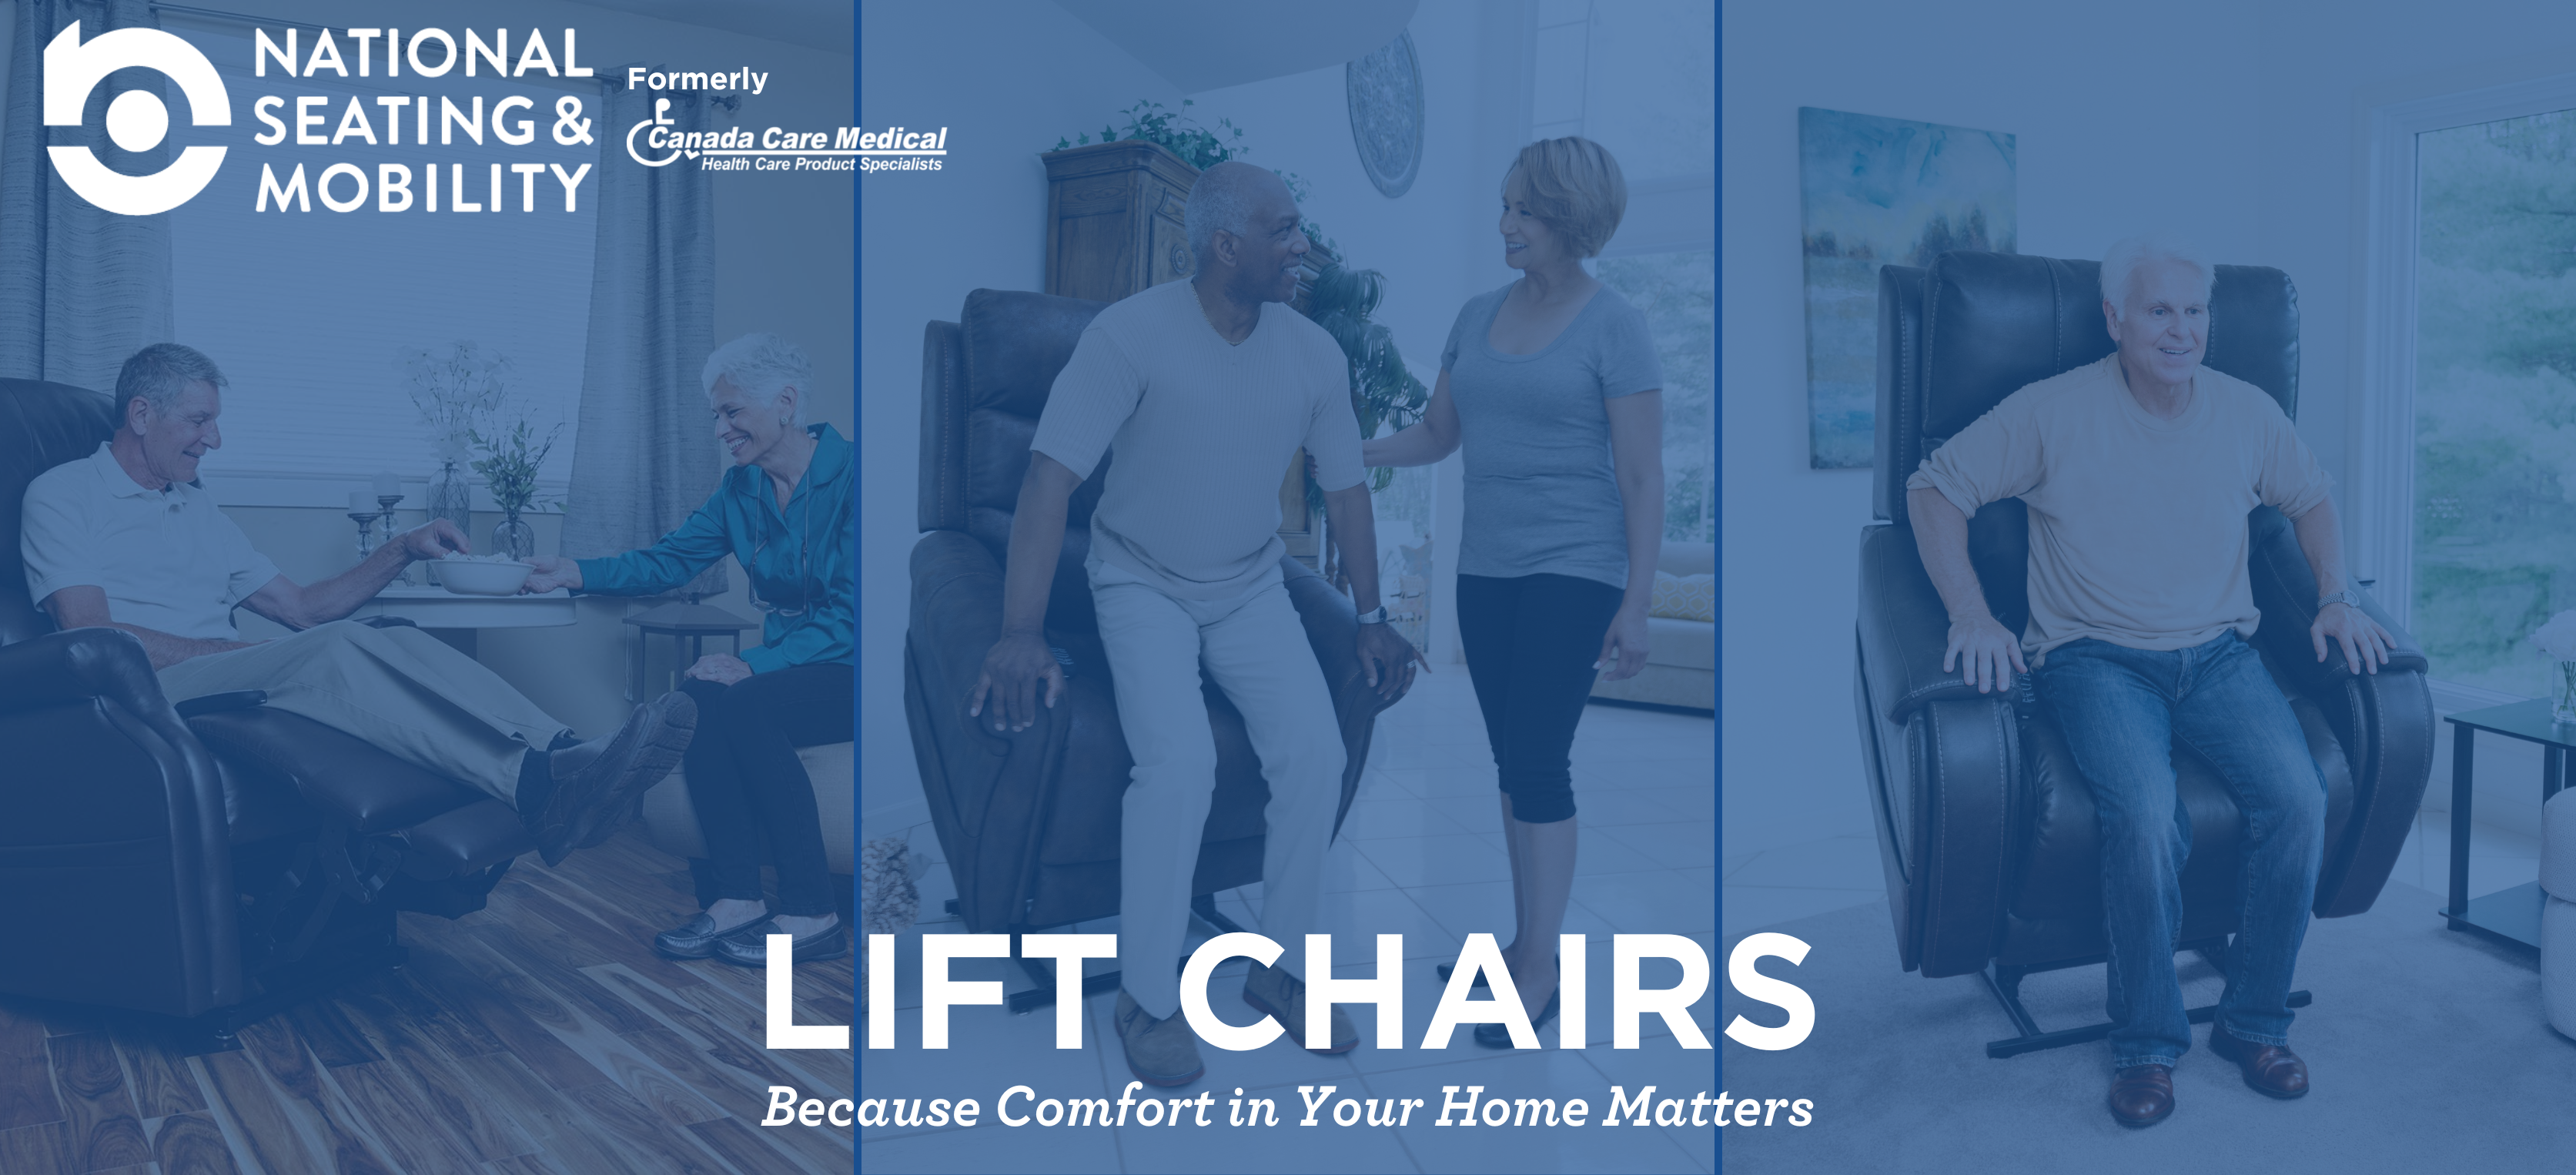 Three images of people using lift chairs.